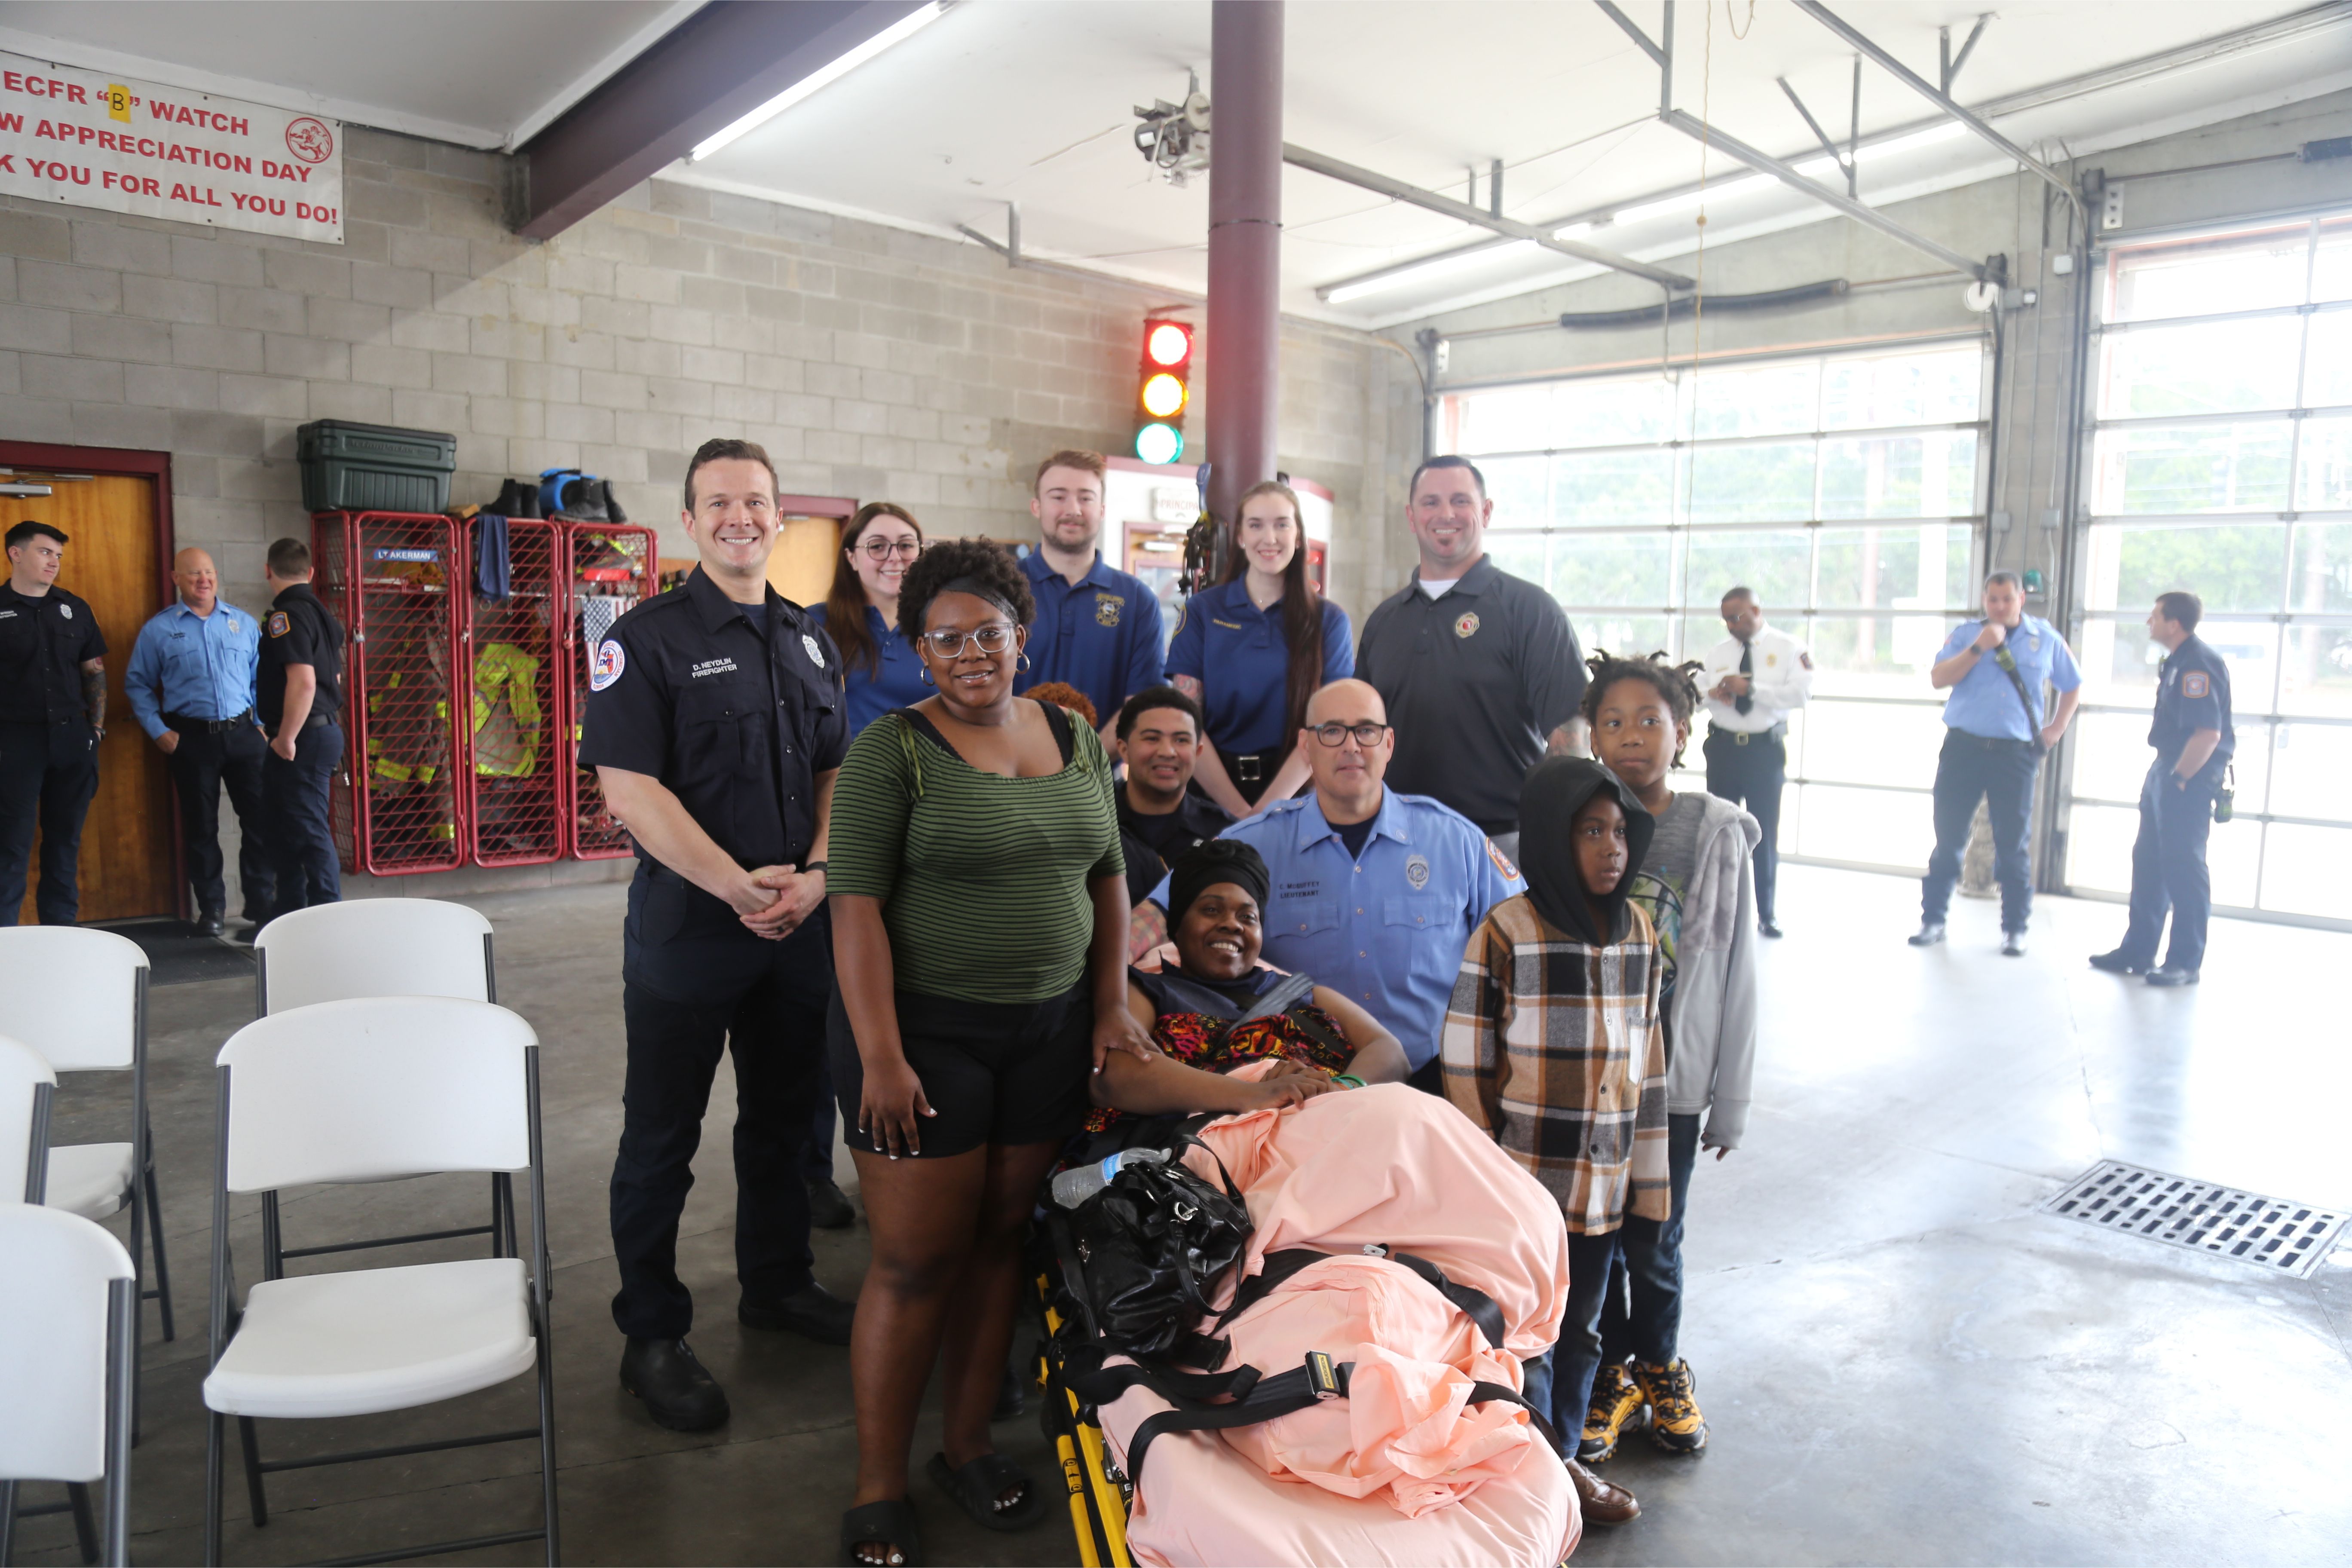 Firefighters, paramedics and EMTs from the Deauville fire with the rescued victim and her family